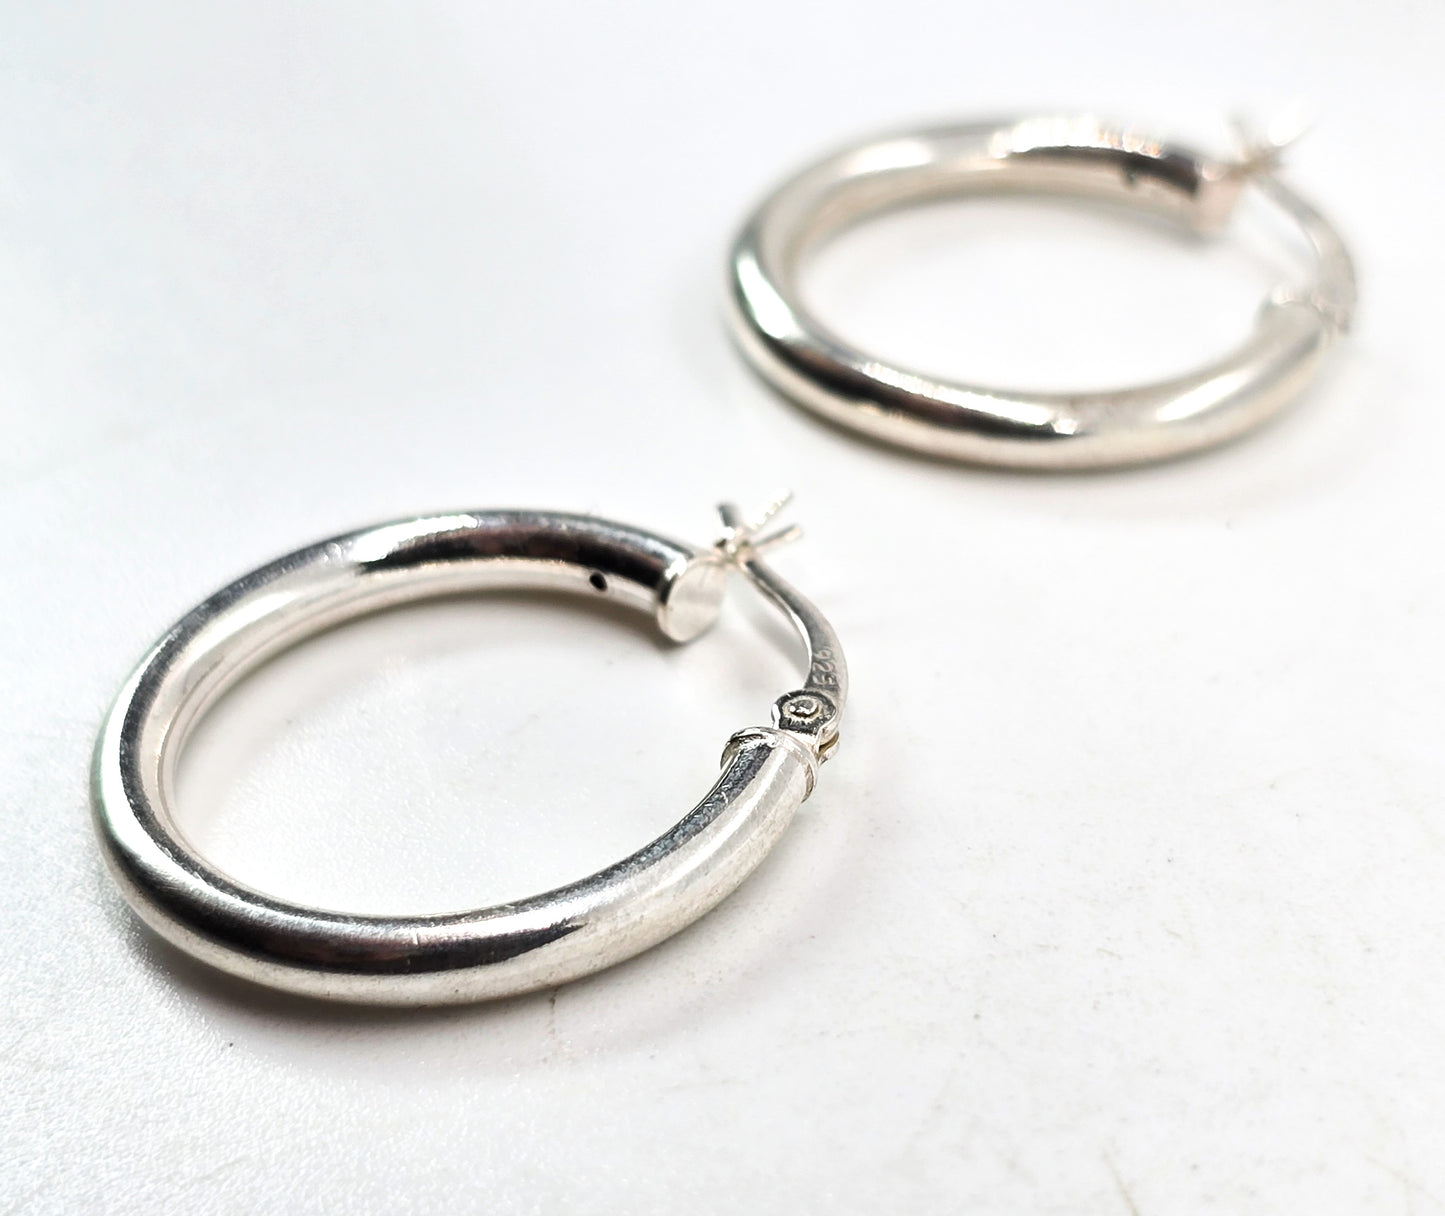 Thick round lever back sterling silver vintage retro hoop earrings